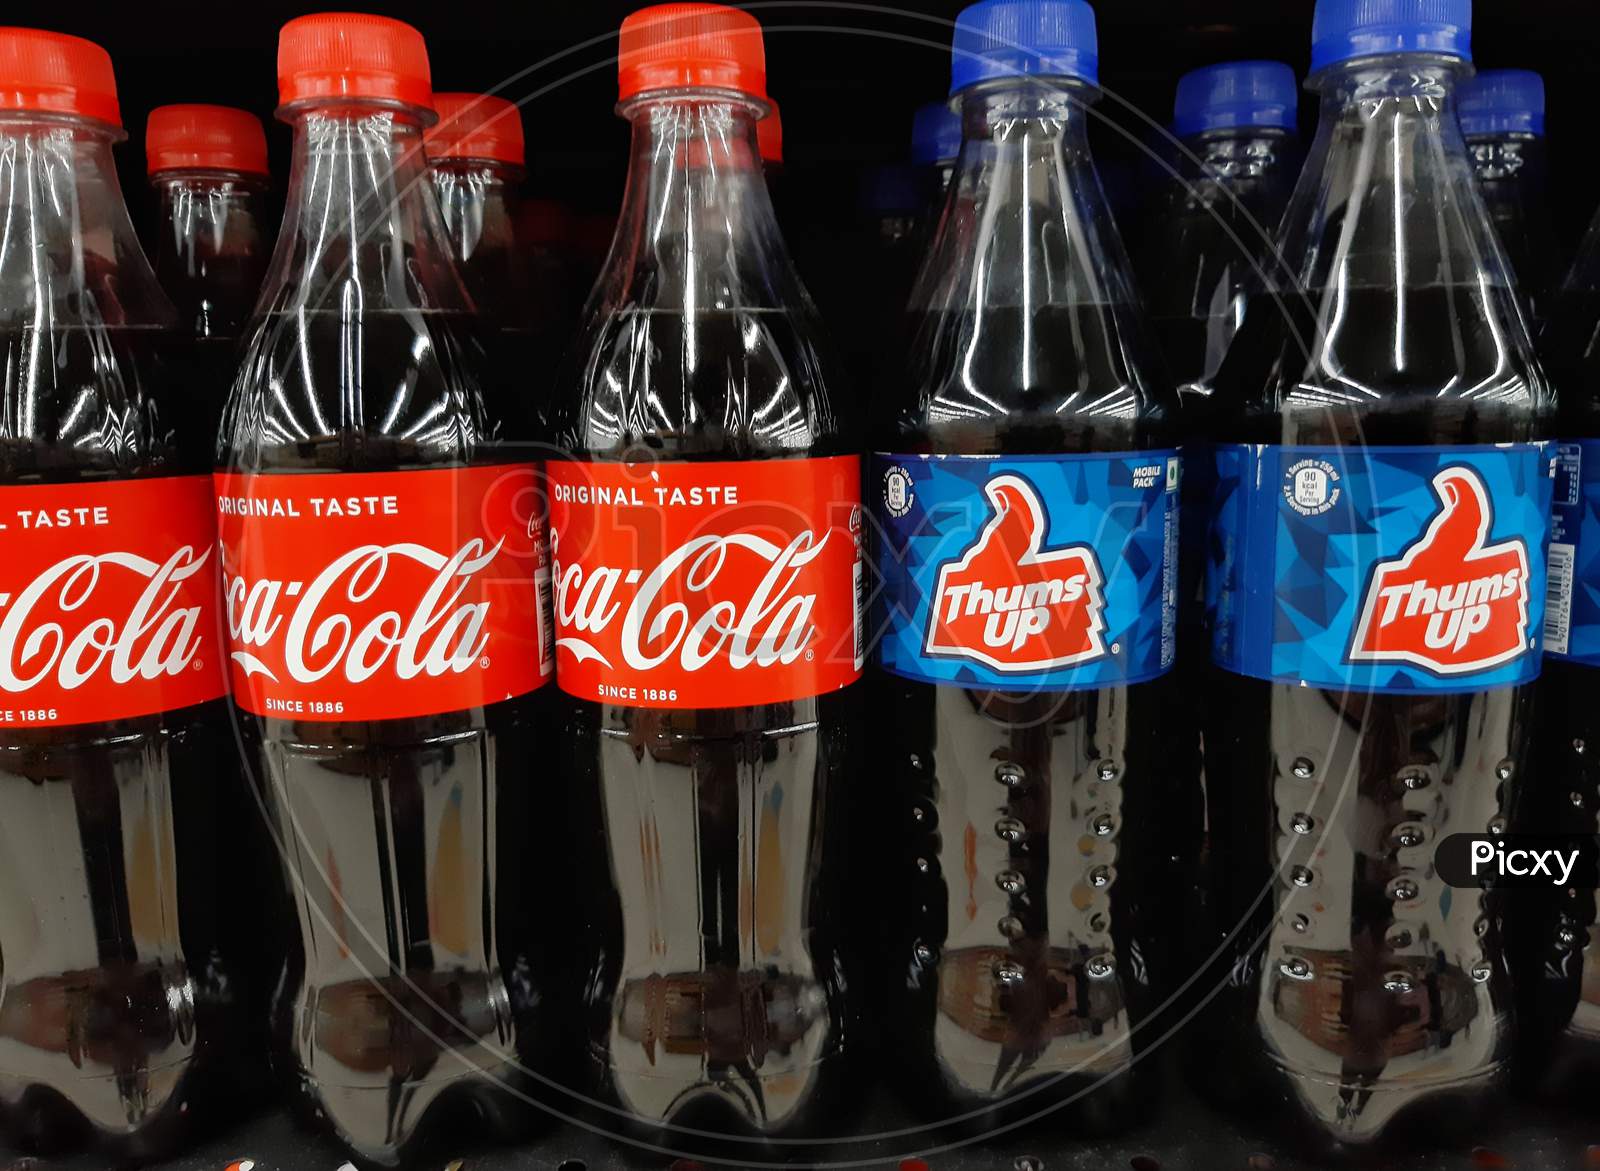 bottles of coca cola and thums up in supermarket shelf